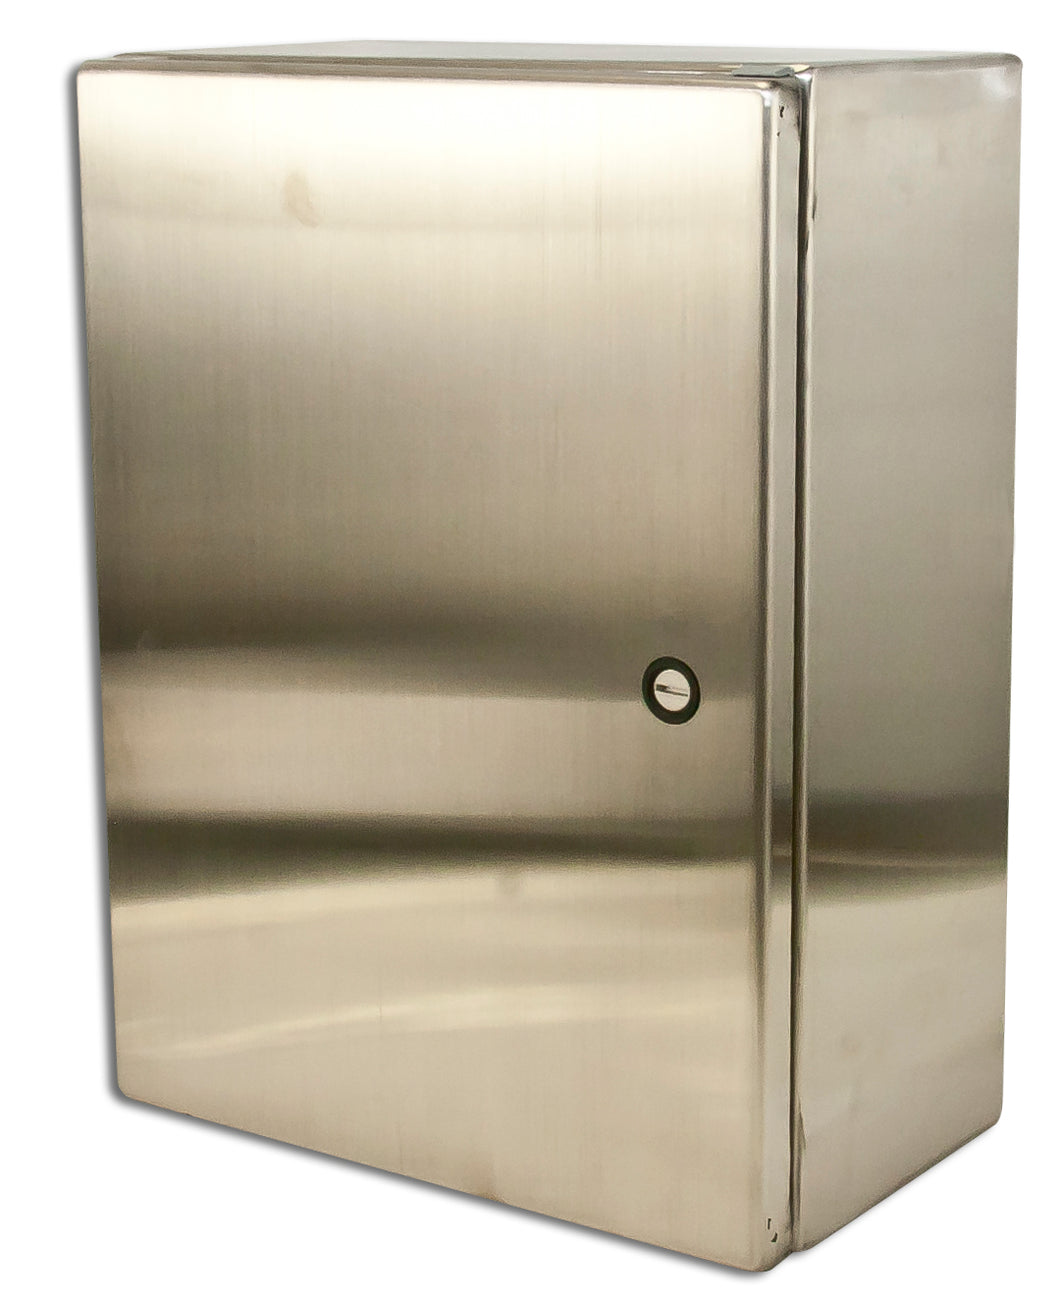 nVent Hoffman CSD242412SS Enclosure, NEMA 4X, Hinged, Stainless Steel, 24